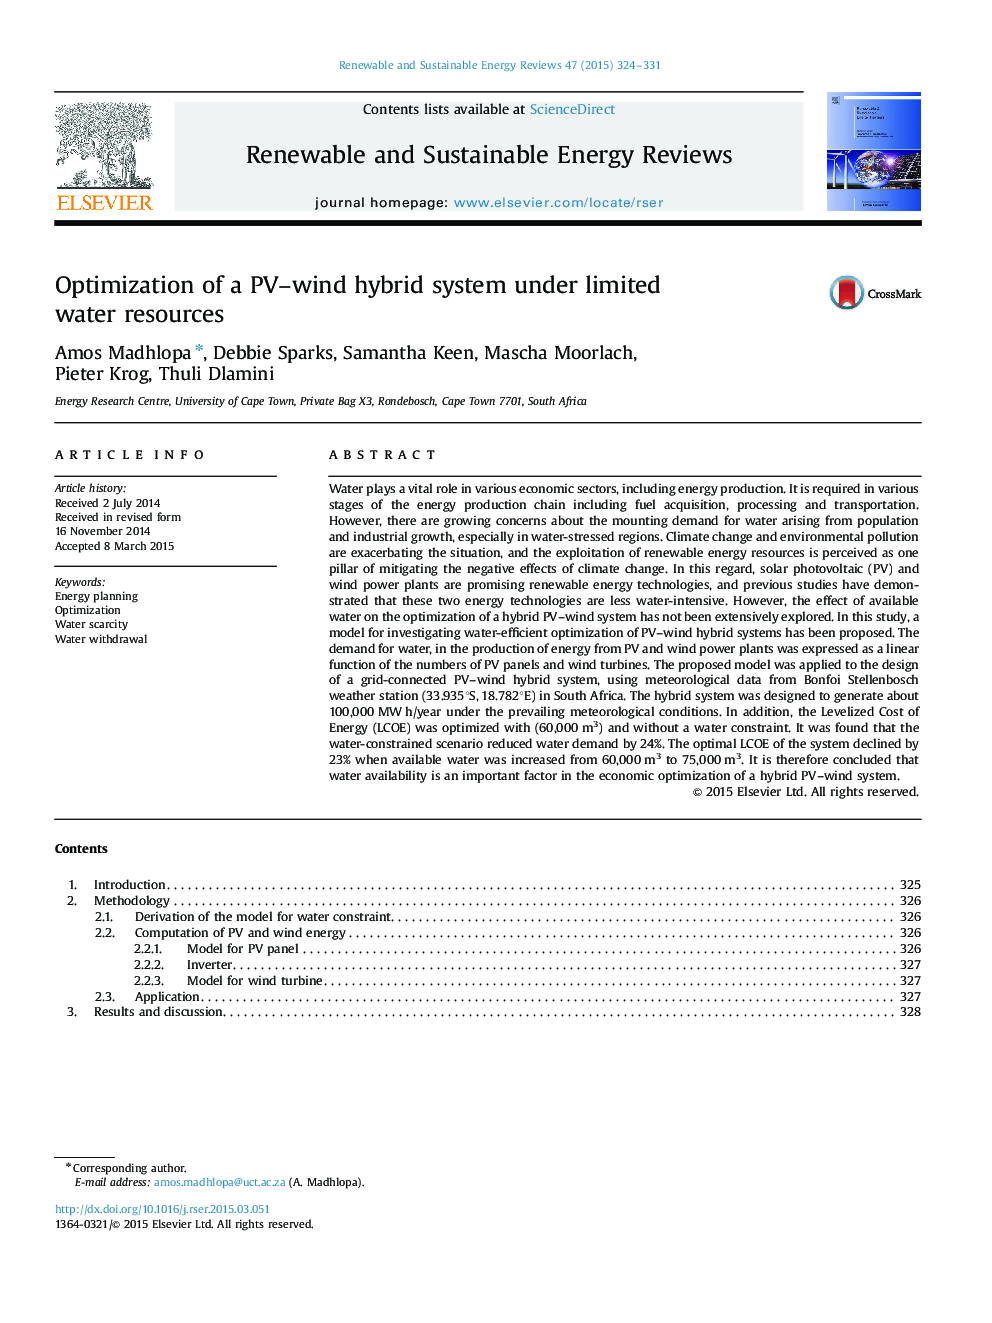 Optimization of a PV-wind hybrid system under limited water resources